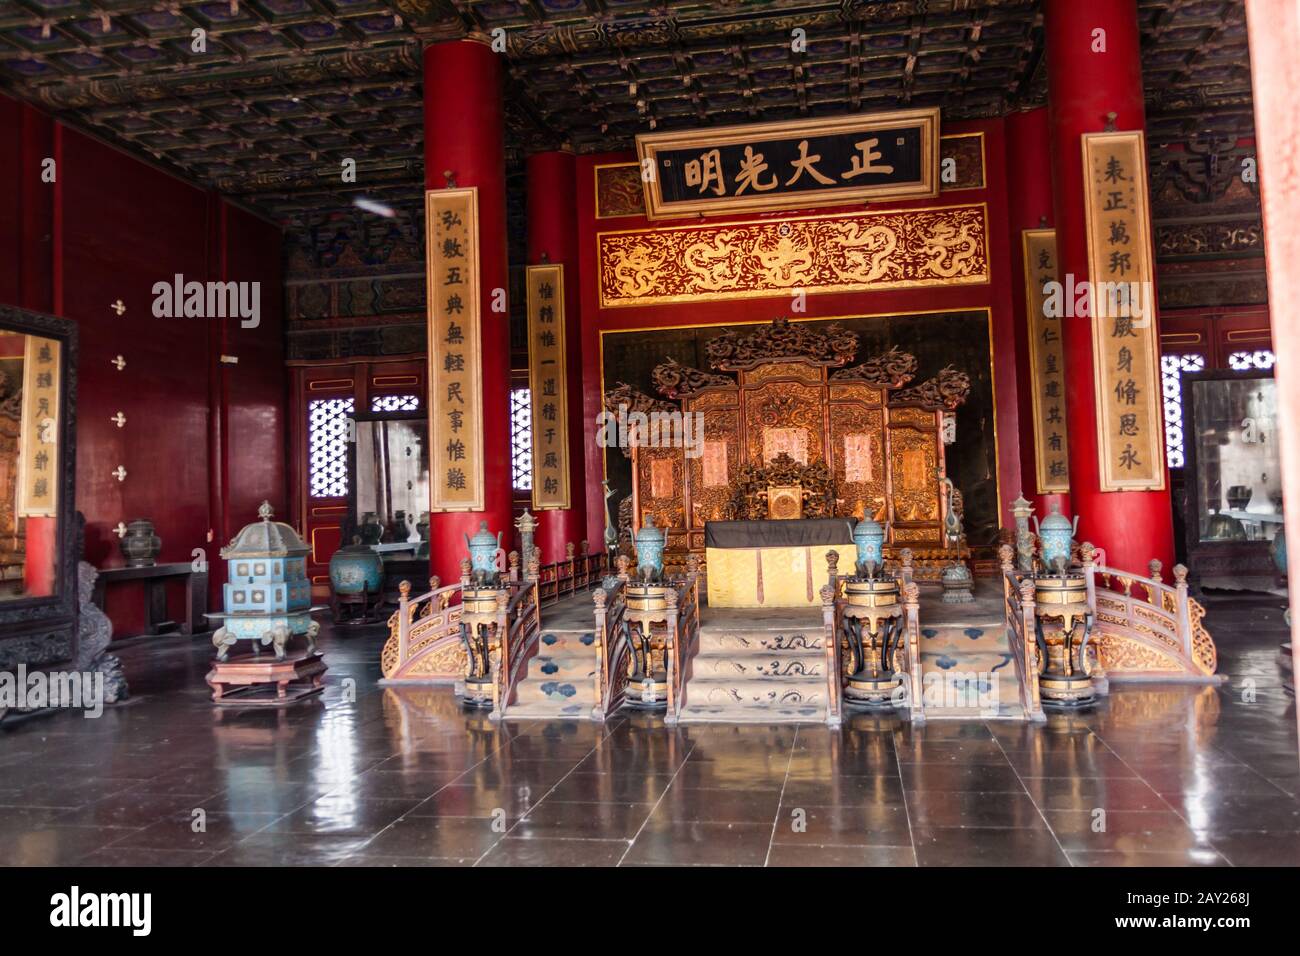 Throne in the Palace of Heavenly Purity, Forbidden City, Beijing Stock  Photo - Alamy